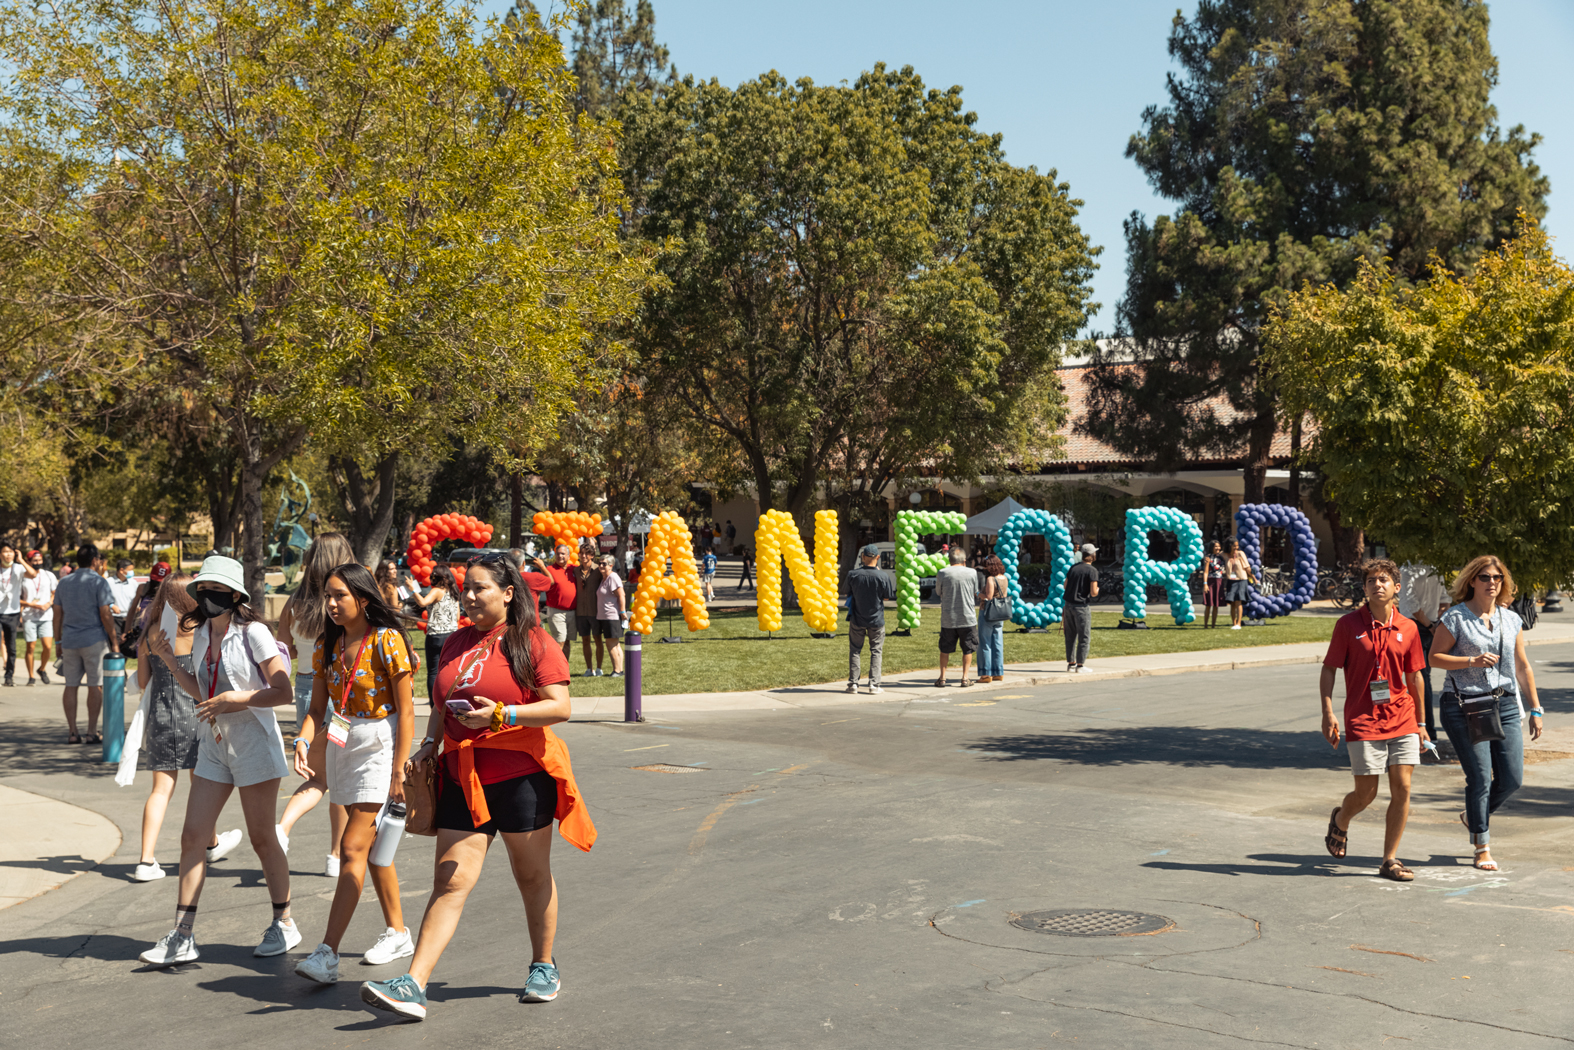 Students walk on the Stanford University Campus on a sunny day